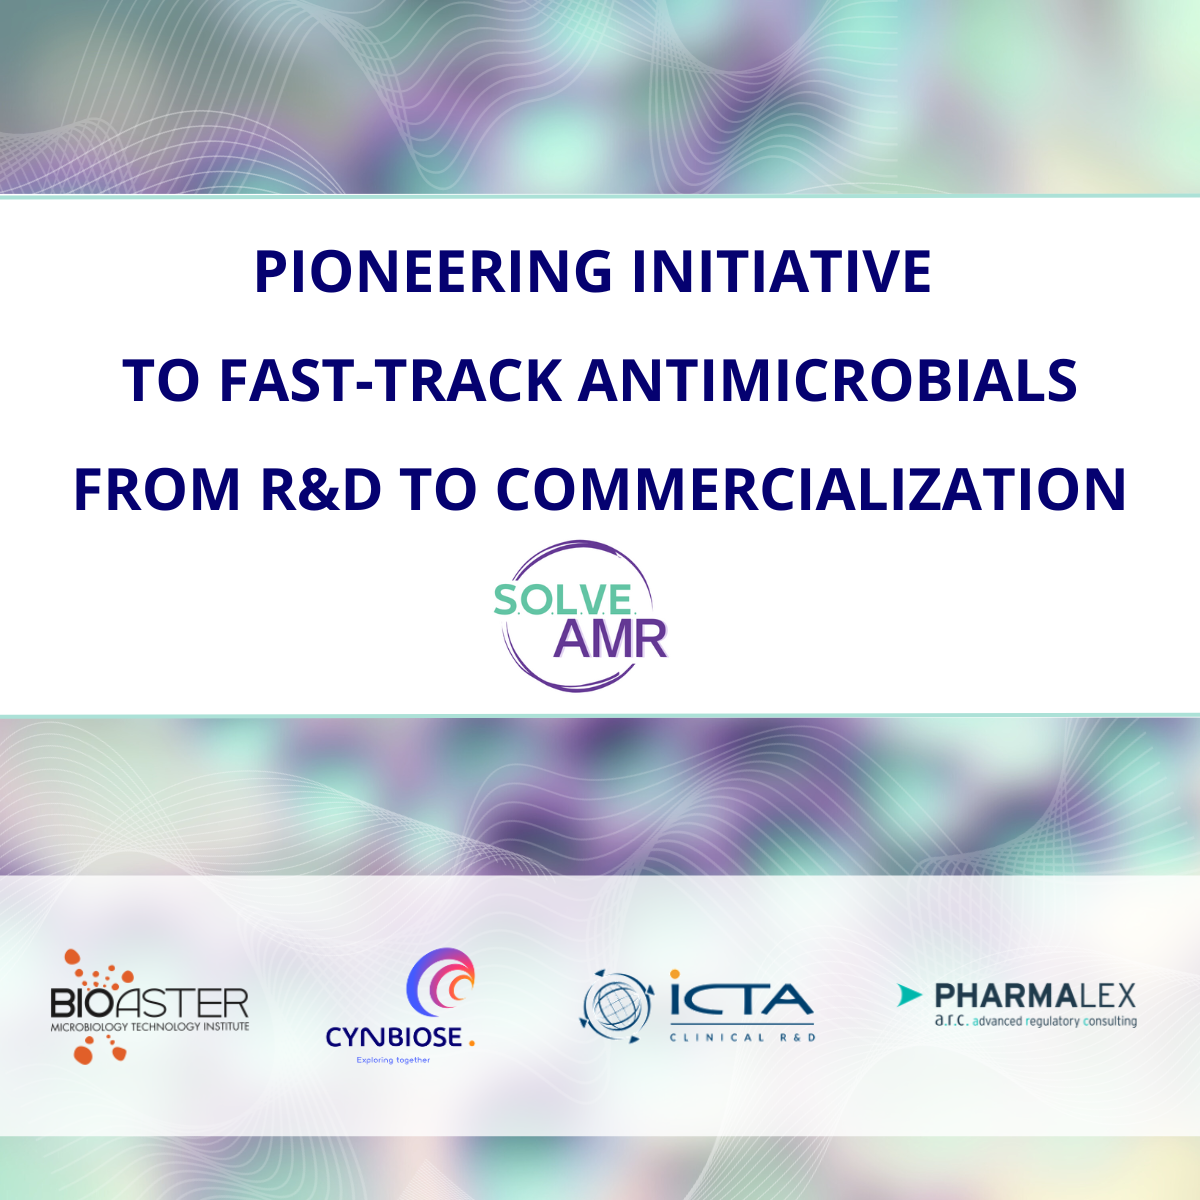 Pioneering initiative to fast-track antimicrobials from R&D to commercialization